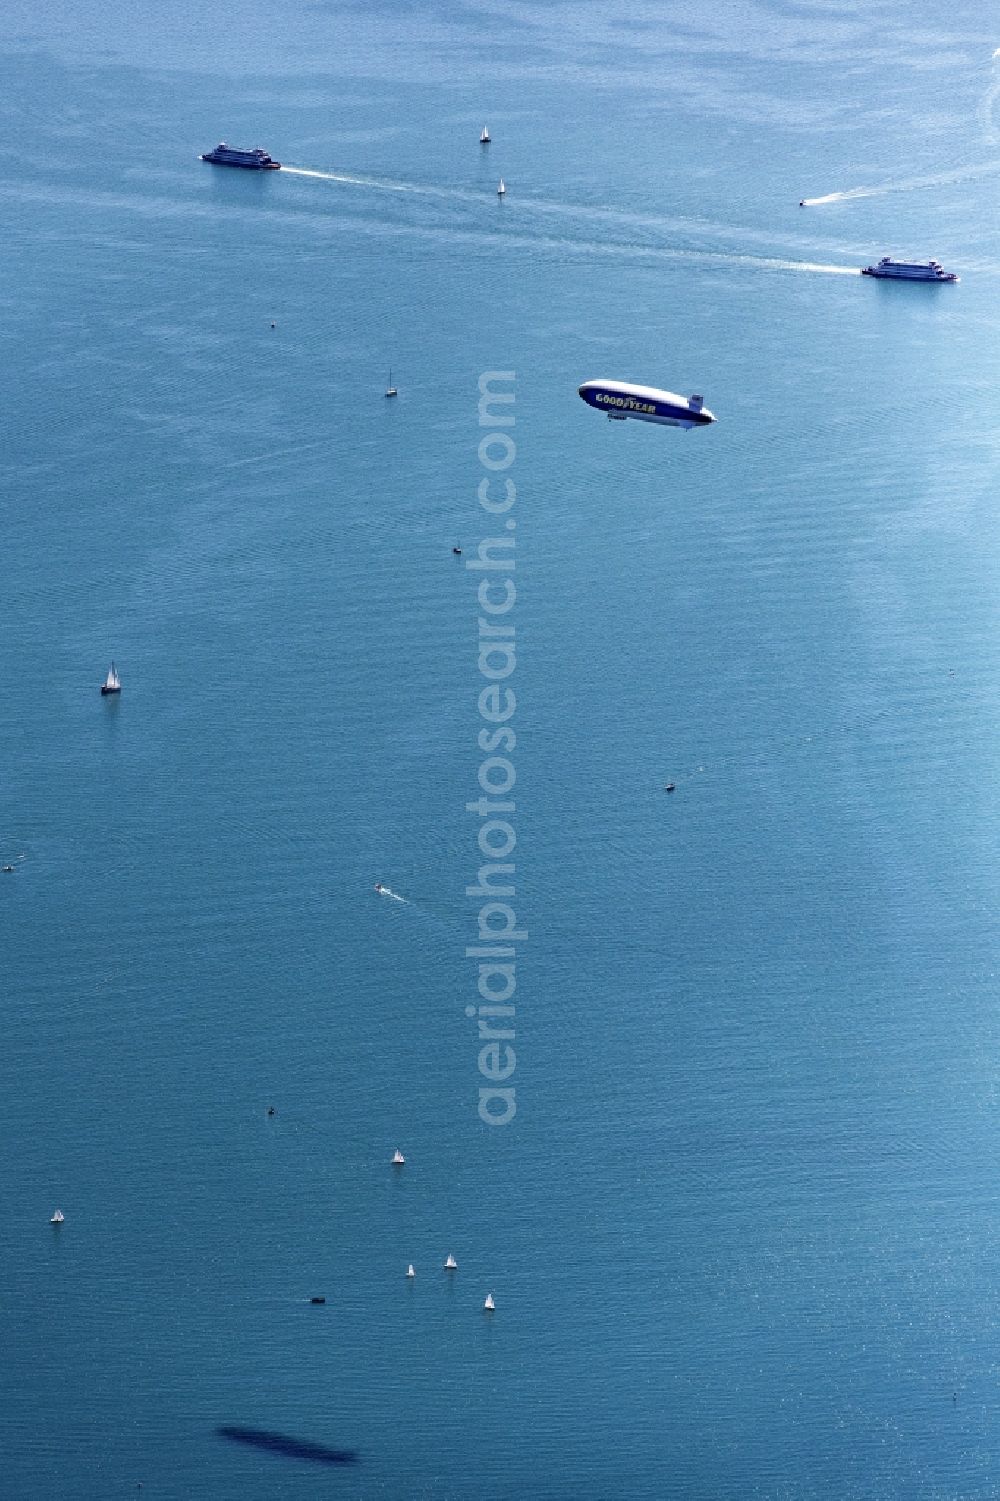 Konstanz from the bird's eye view: Airship ueber dem Bodensee and on See Segelboote and Boote of Bodensee Schifffahrt in flight over the airspace in Konstanz in the state Baden-Wuerttemberg, Germany